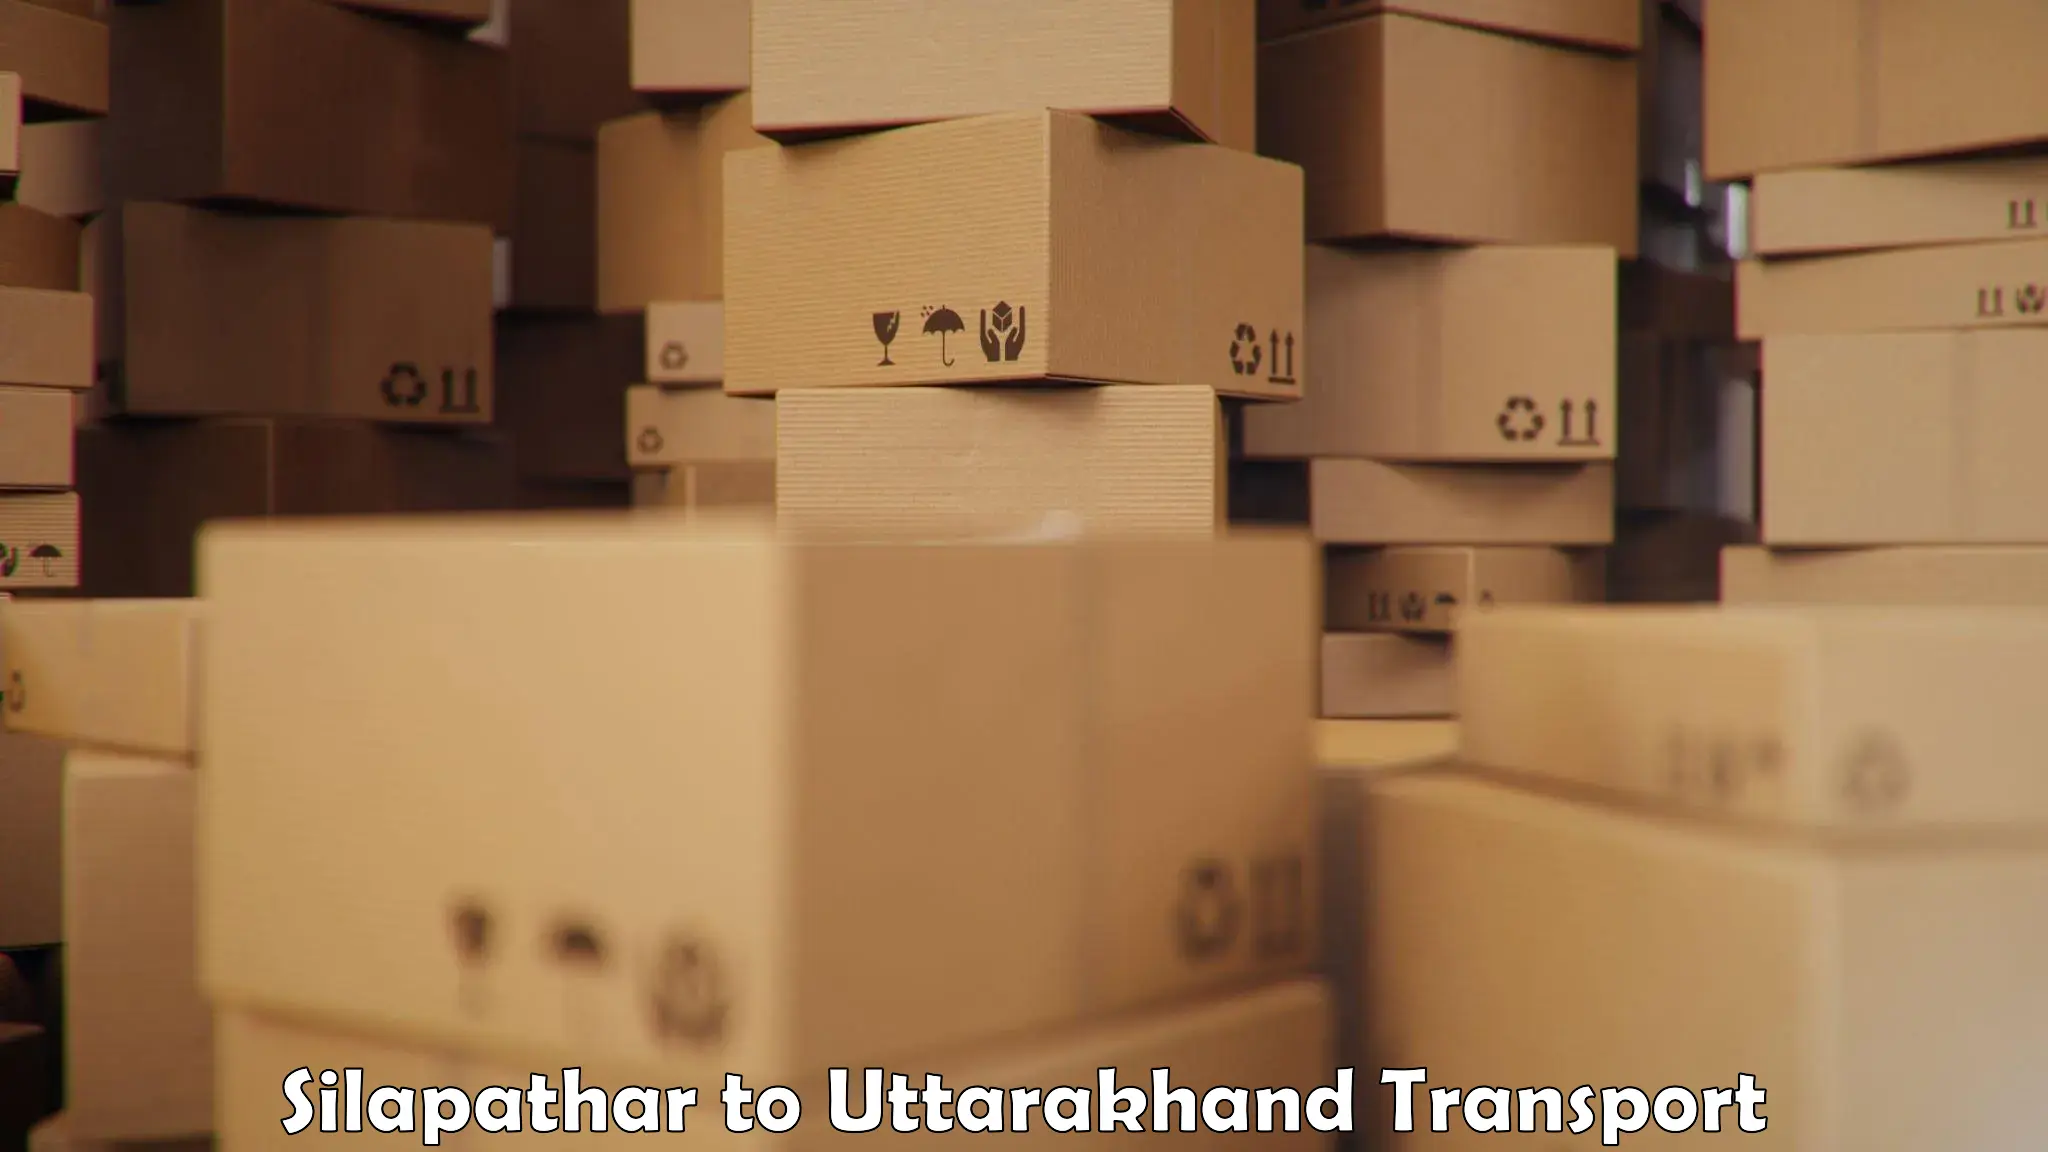 Transport in sharing in Silapathar to Uttarakhand